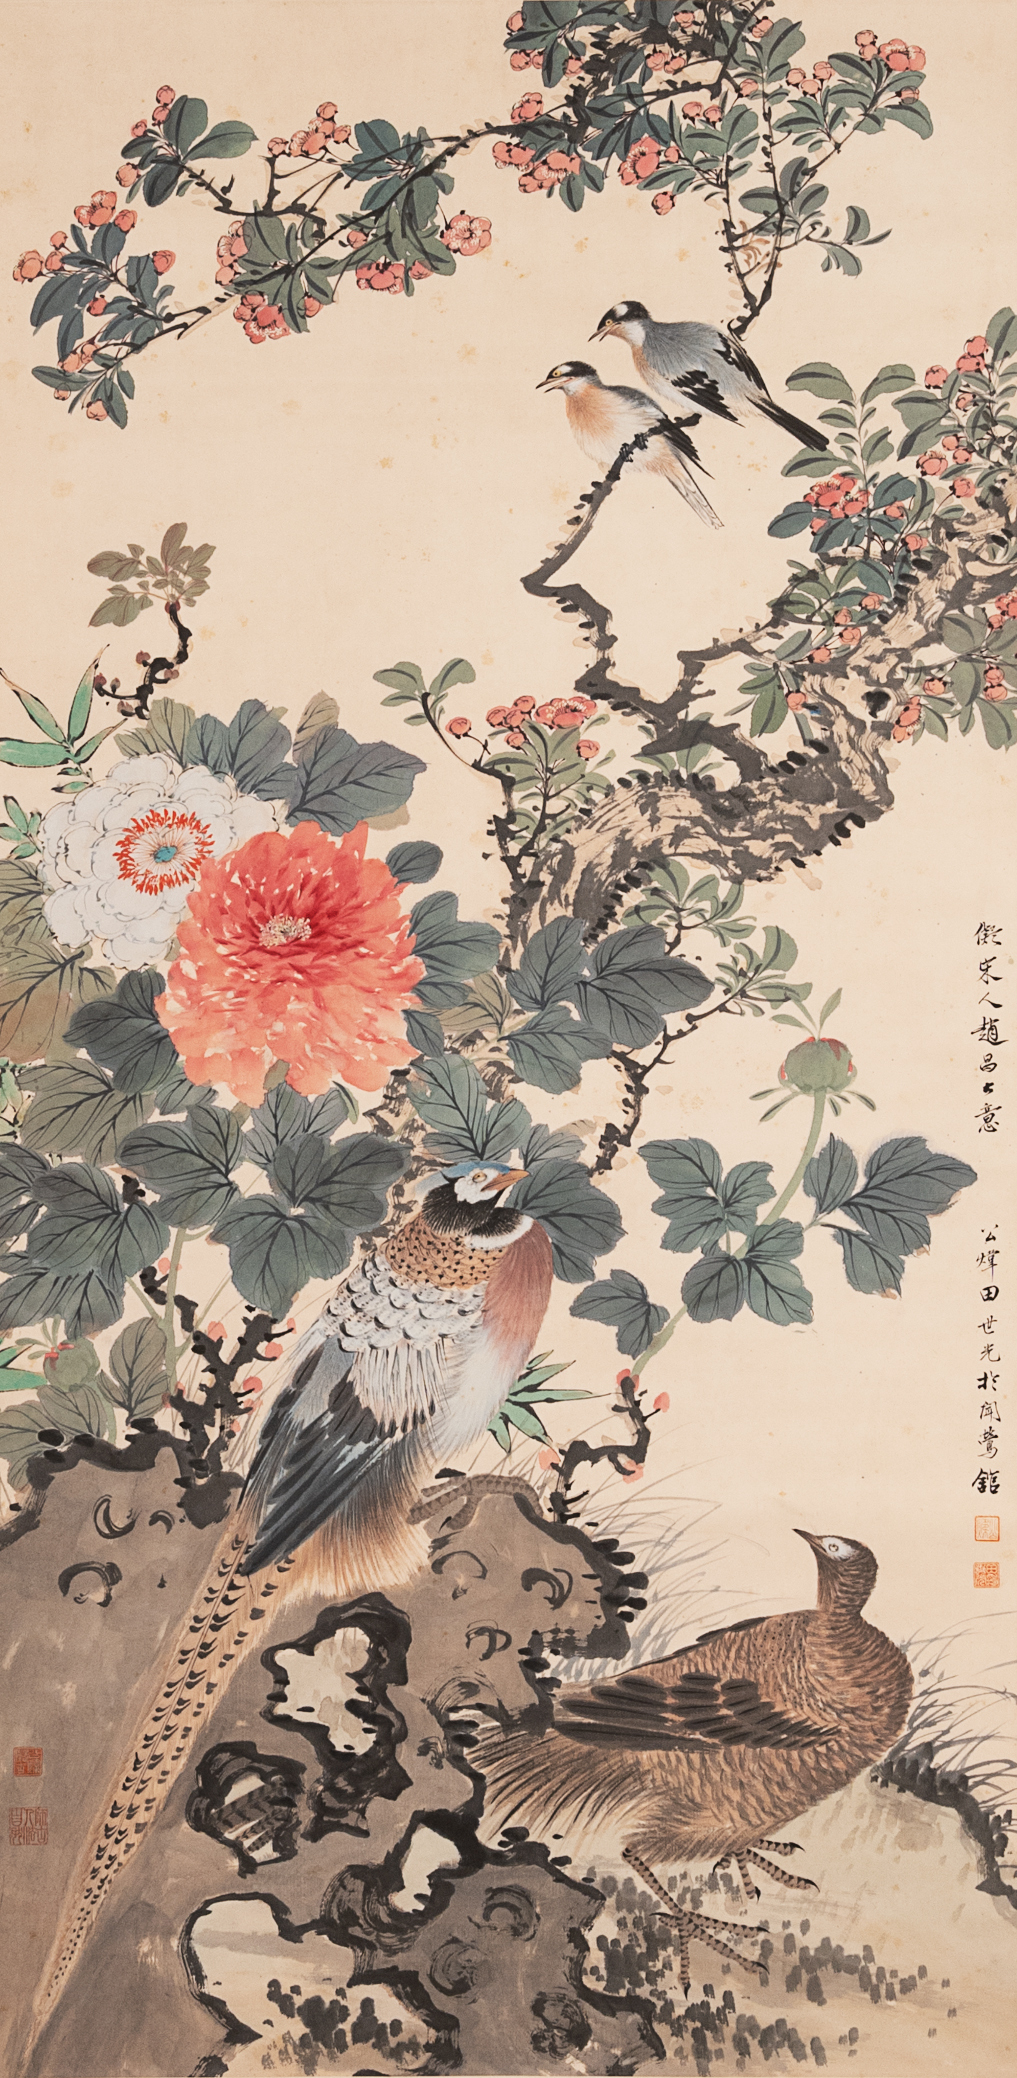 Tian Shiguang ç”°ä¸–å…‰ (1916-1999): 'Birds and flowers', ink and colour on paper - Image 2 of 7